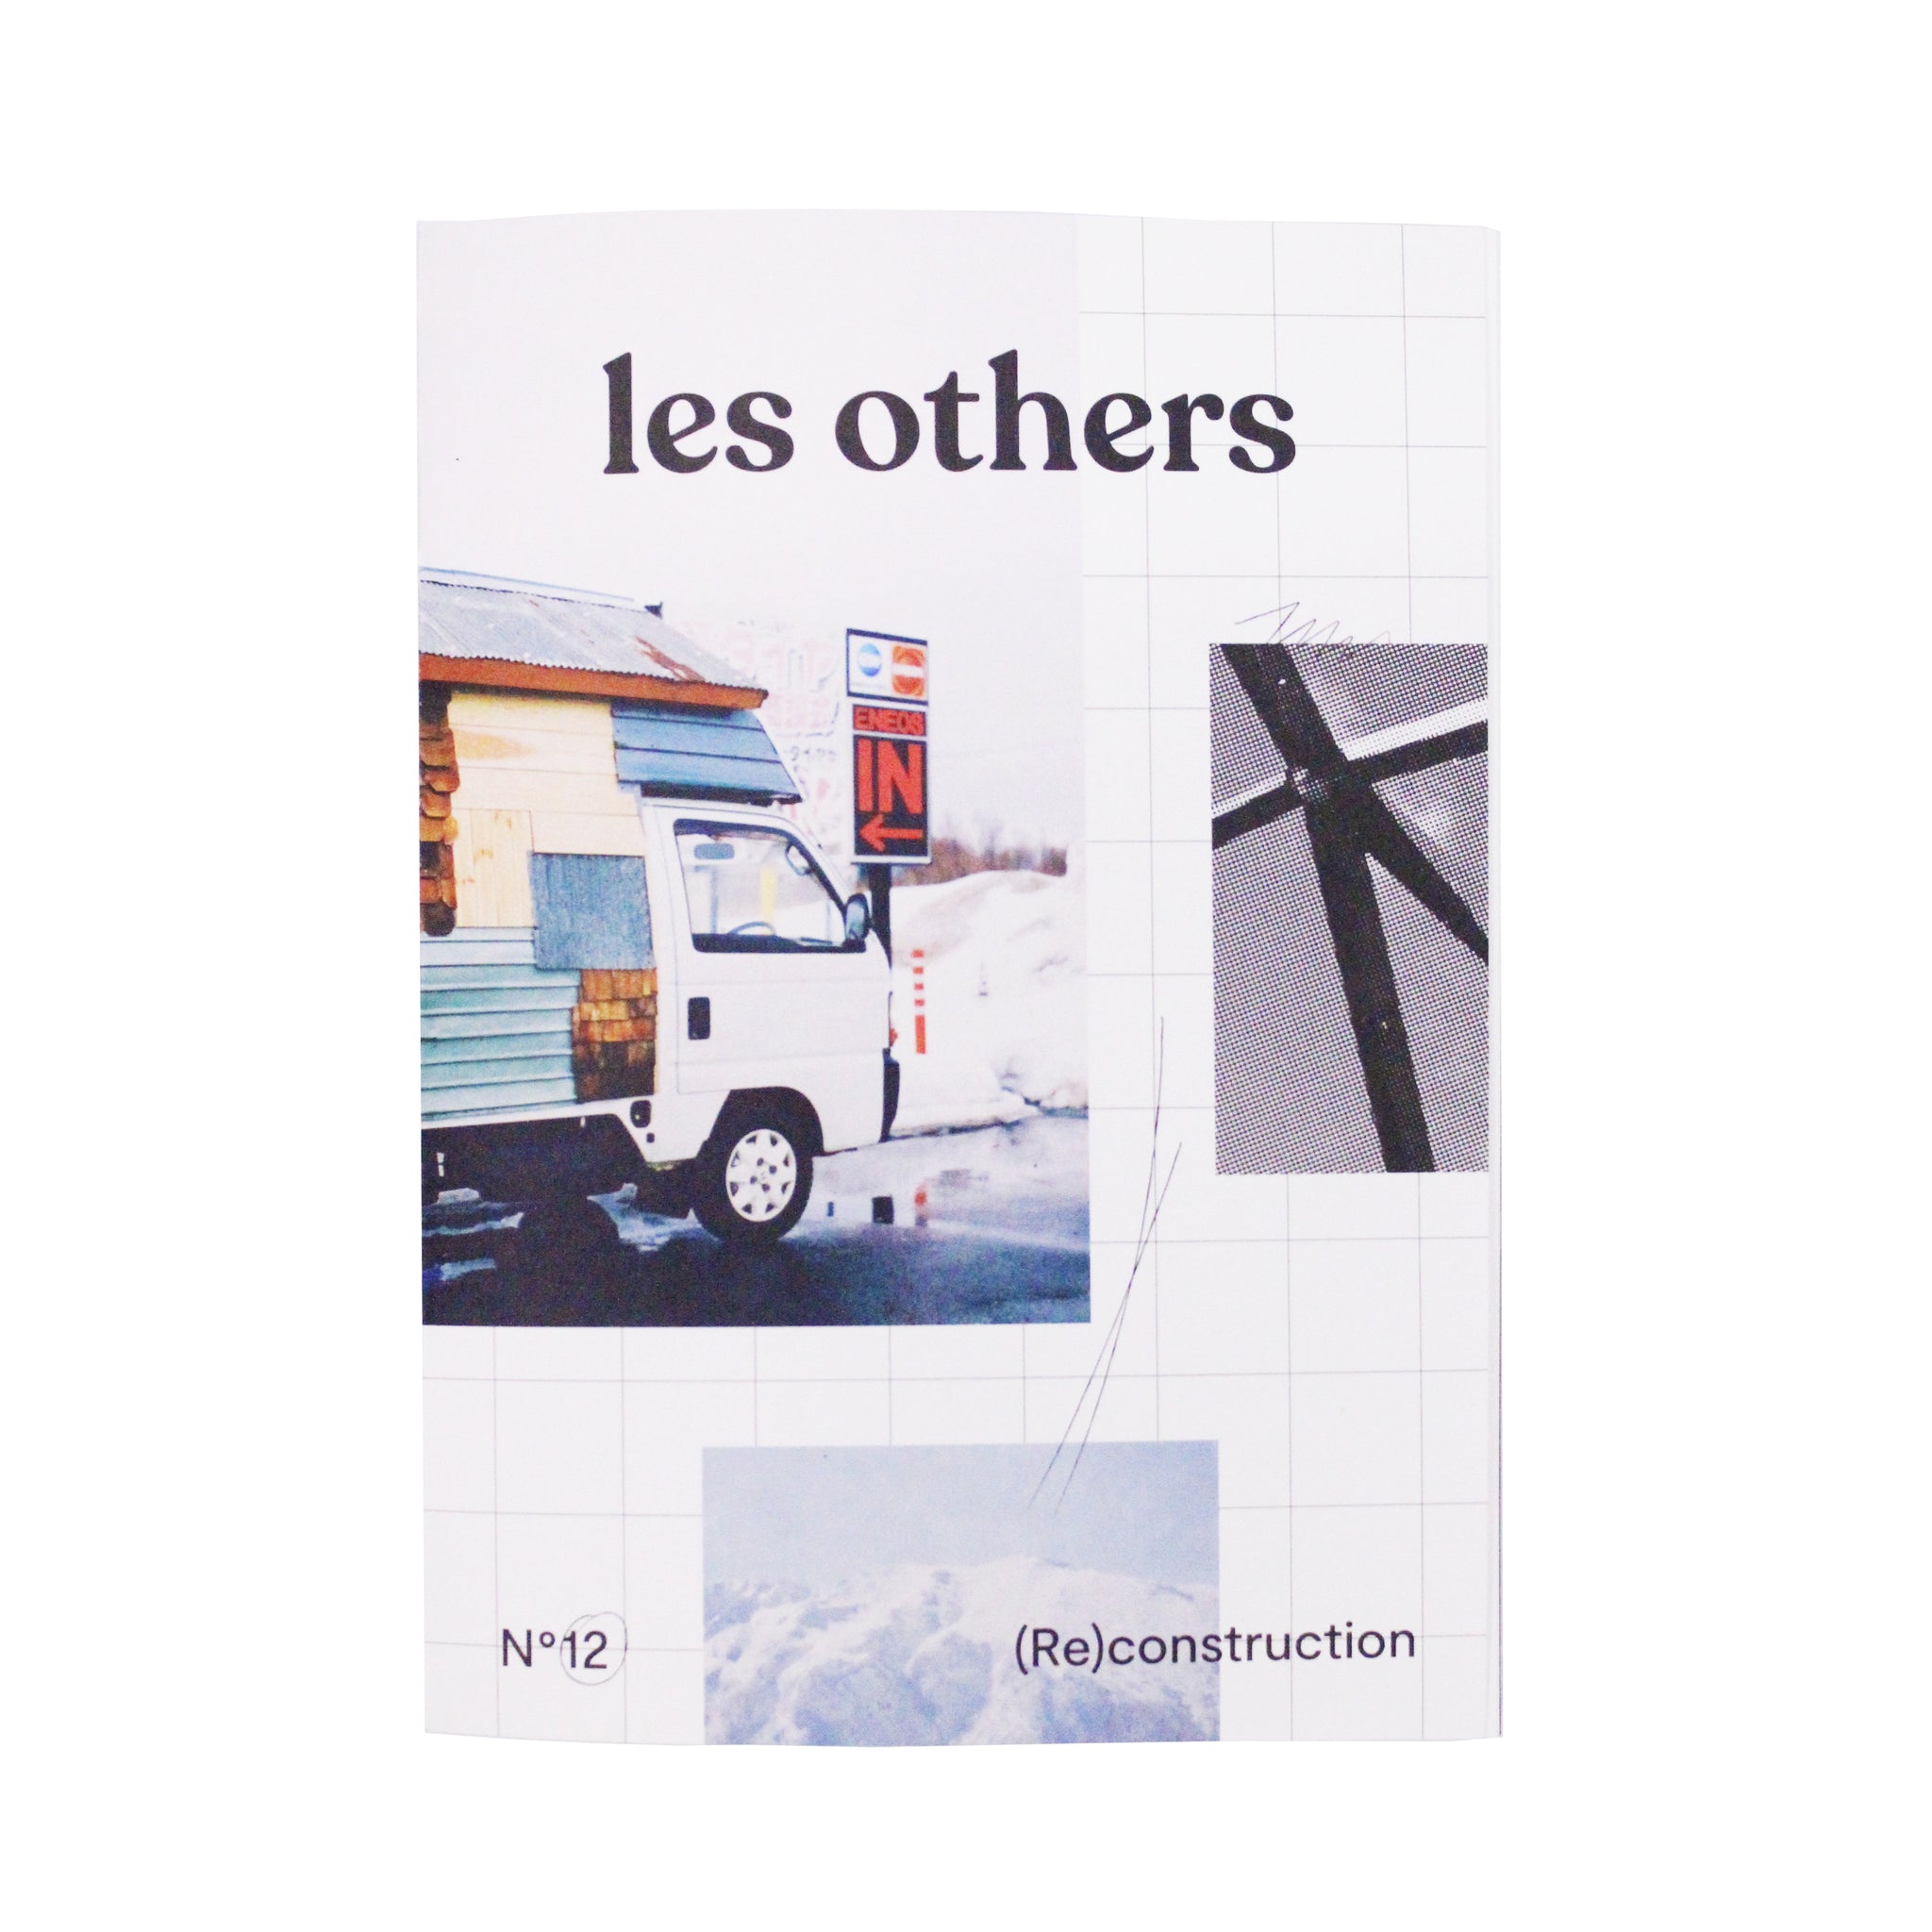 Les Others n°12 - (Re)construction